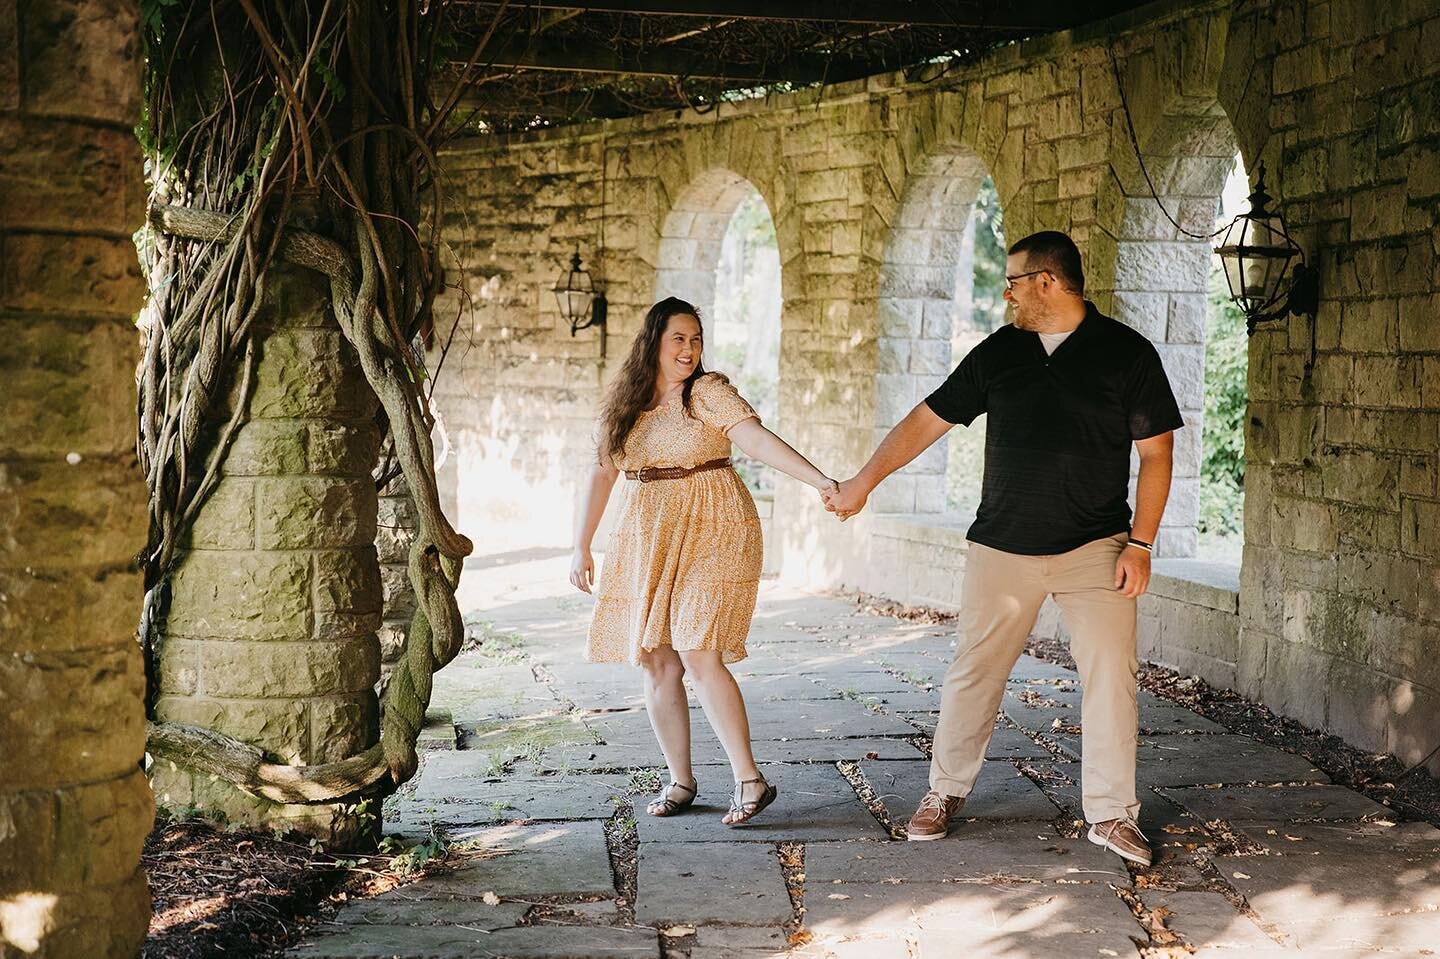 The engagement session giveaway winner is&hellip;

Rebecca &amp; Clay!! 😃
@rebecca_rcs 

✨✨✨

&amp; for the second portion of the giveaway.. 

@momtomany18 !! 😁

(check your DM&rsquo;s to get your goodies!)

Thank you so much to all who joined in!!